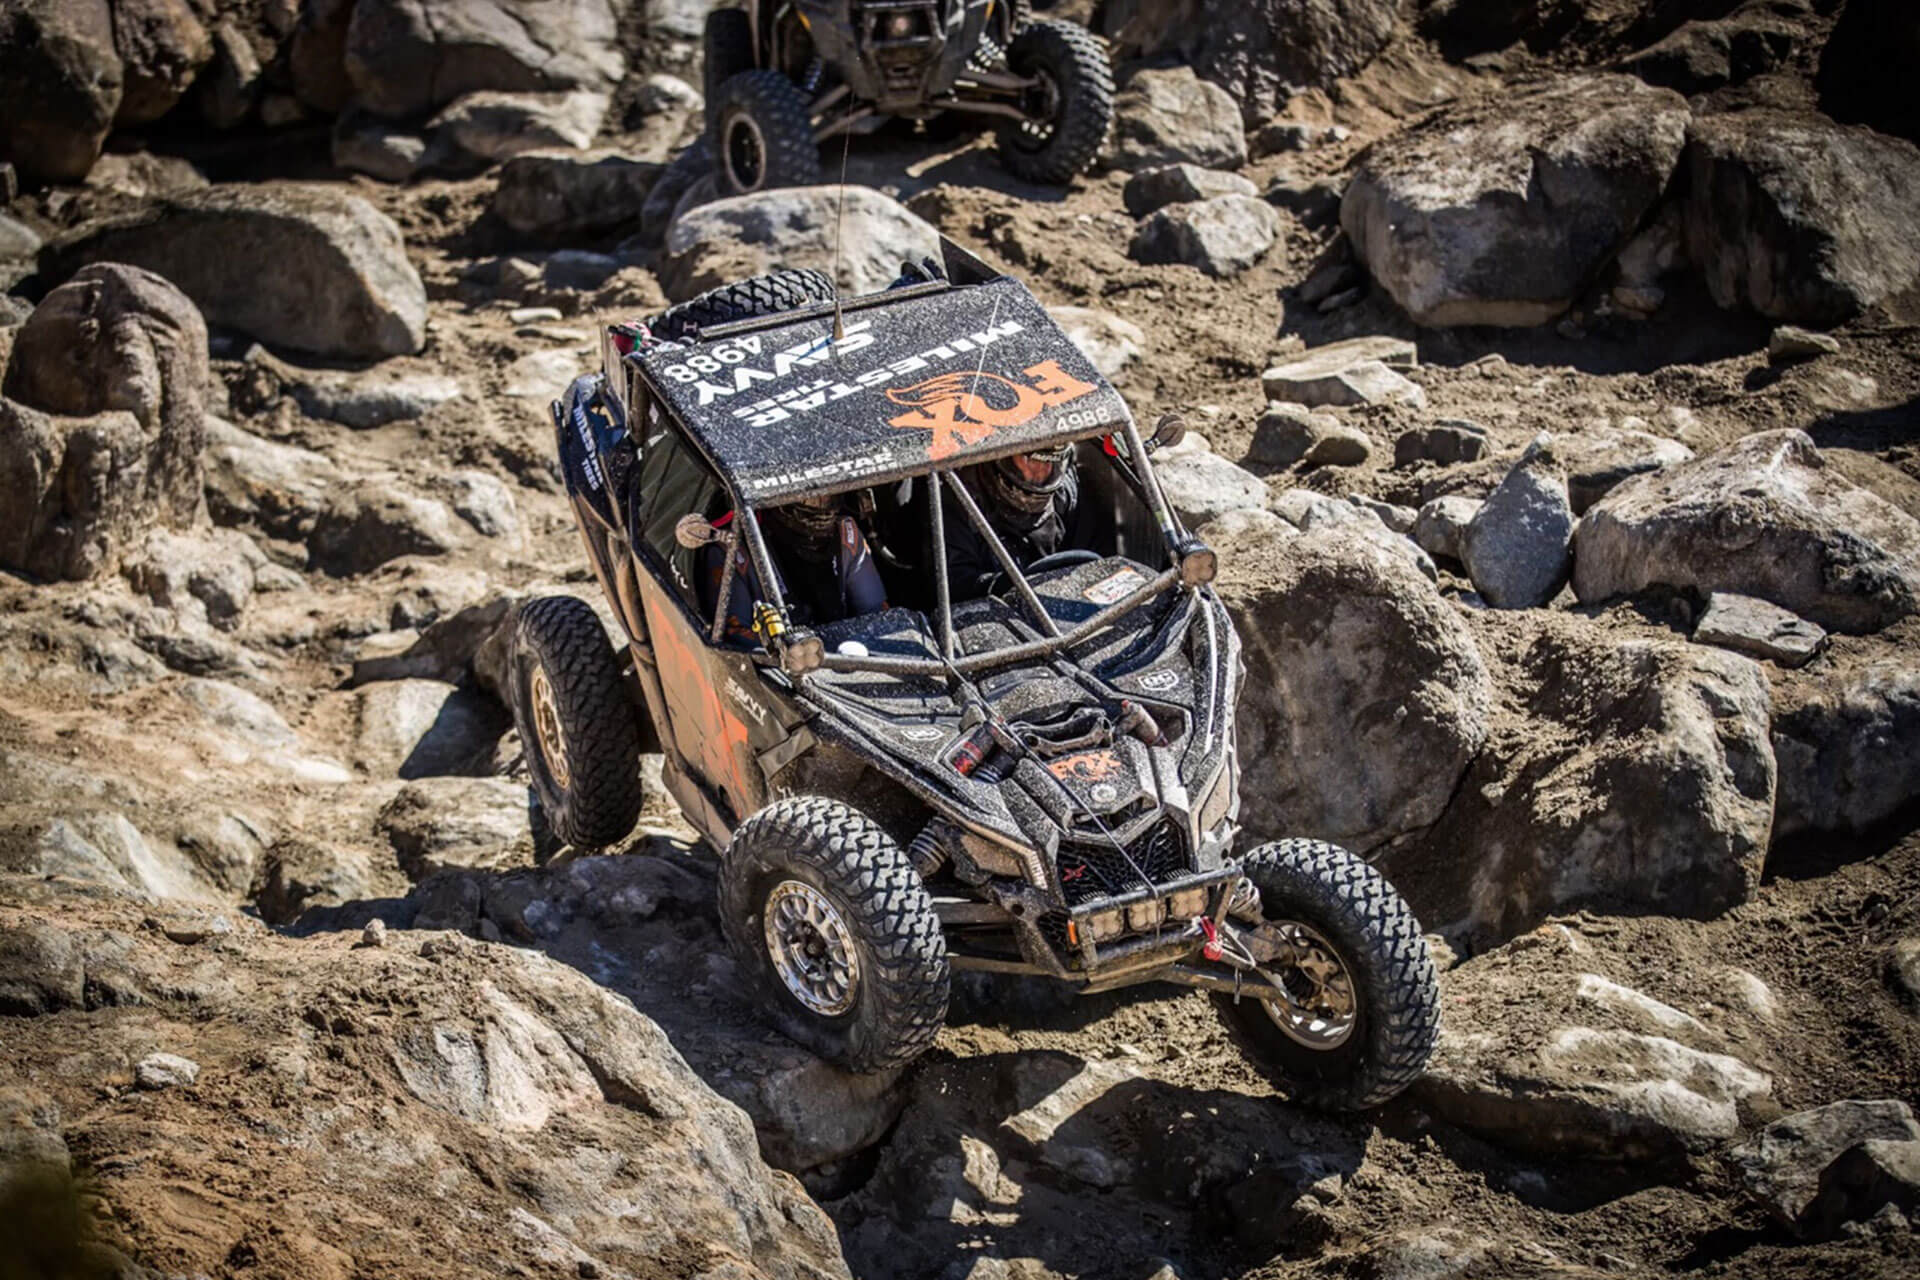 MILESTAR TO BECOME THE OFFICIAL UTV TIRE OF KING OF THE HAMMERS